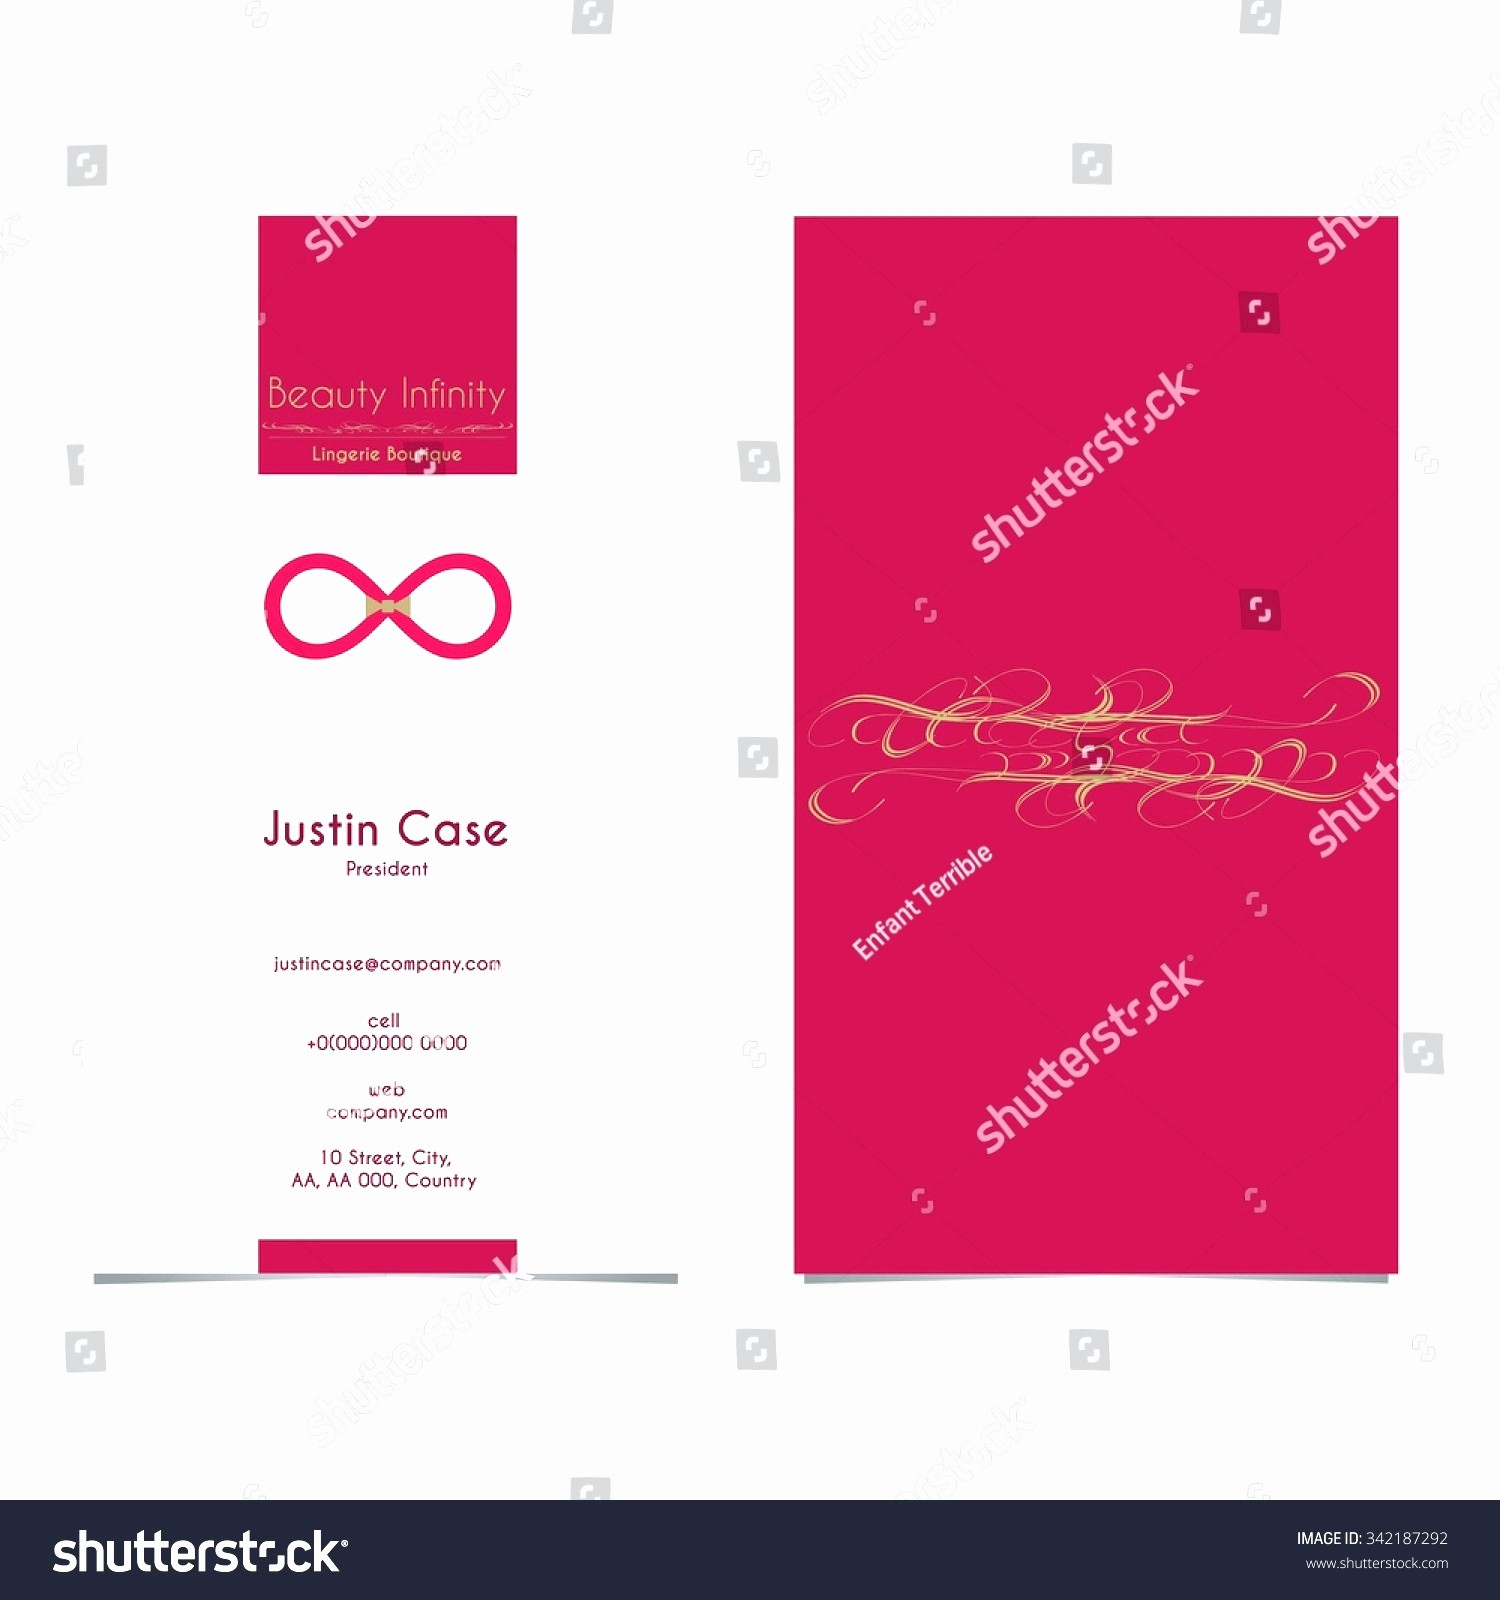 Rideshare Business Cards Inspirational Lyft Card Template Awesome Document